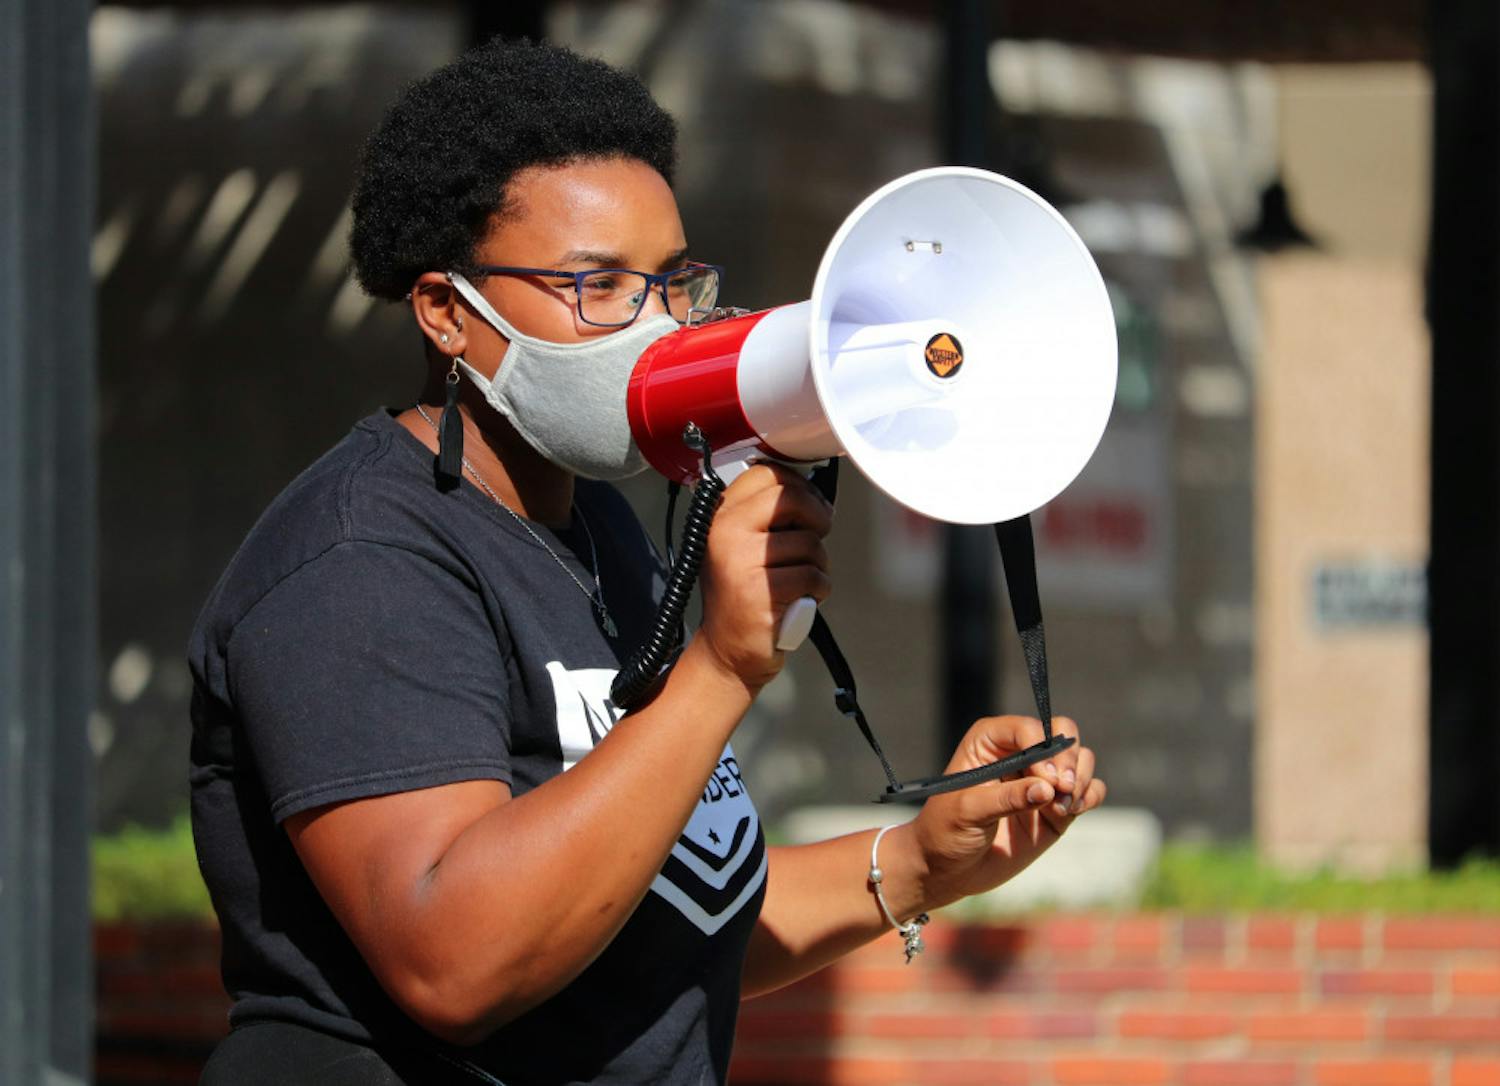 Kiara Laurent speaks to the crowd at Bo Diddley Plaza in Gainesville before protesters march to the Alachua County Courthouse on Saturday, Sept. 26, 2020. Laurent is a member of the Dream Defenders, a black-led organization of young people who planned this event. (Lauren Witte/Alligator Staff)